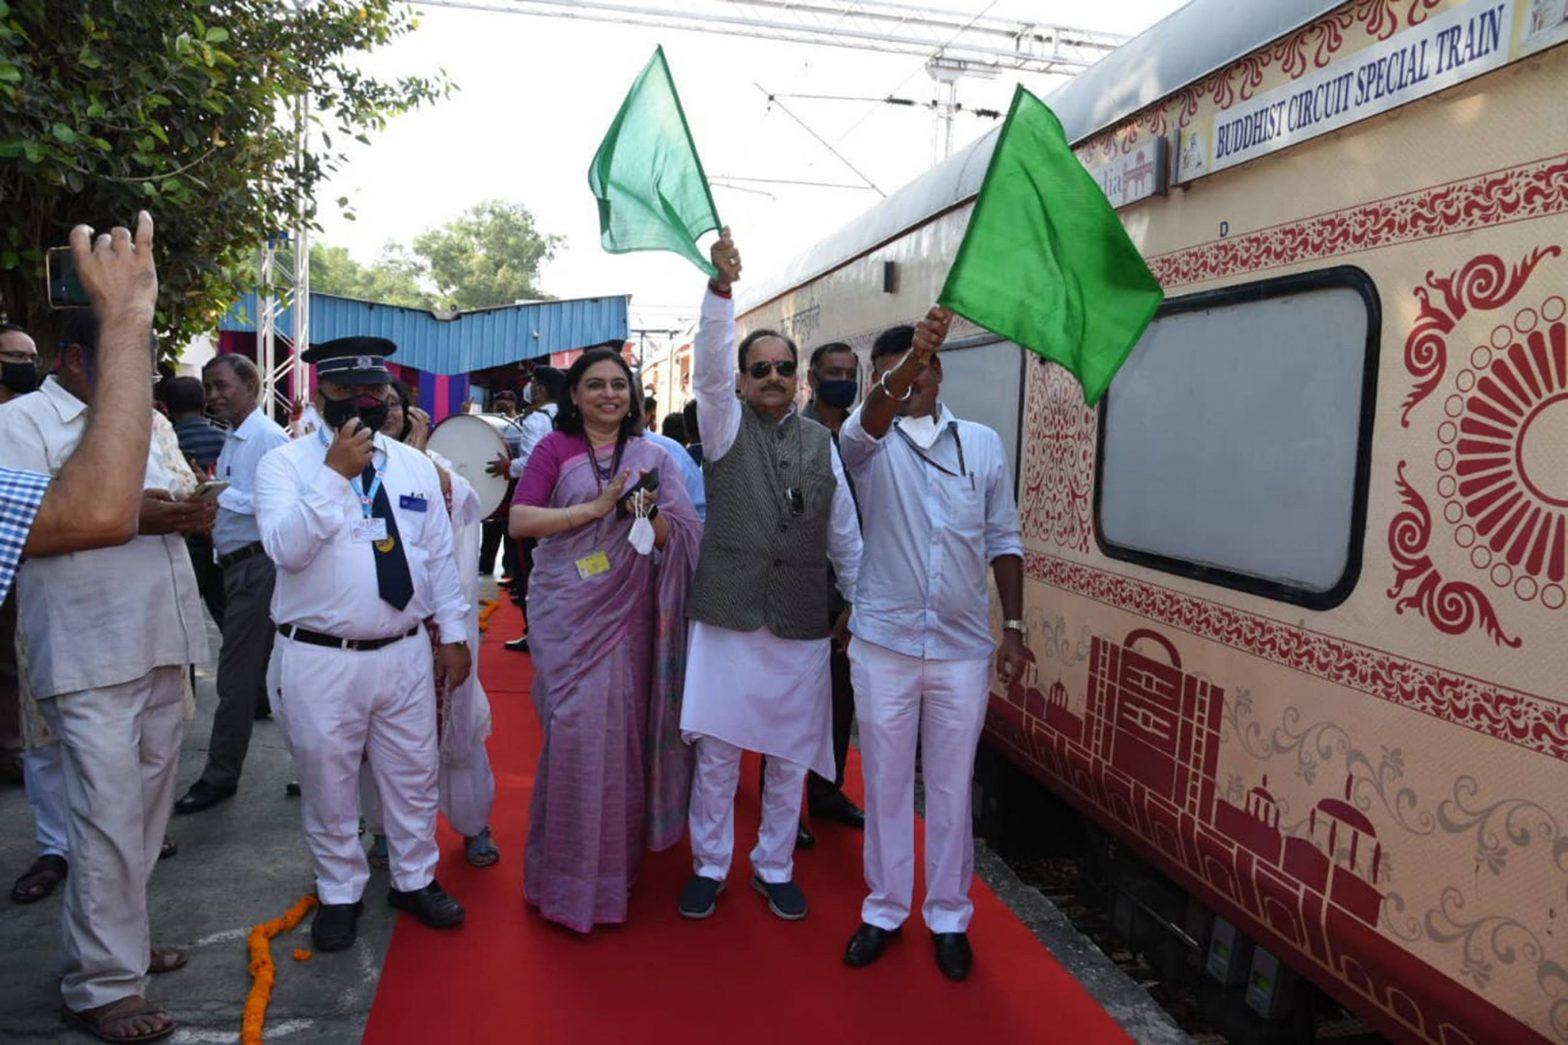 Centre organises ‘Buddhist Circuit Train FAM Tour and Conference’